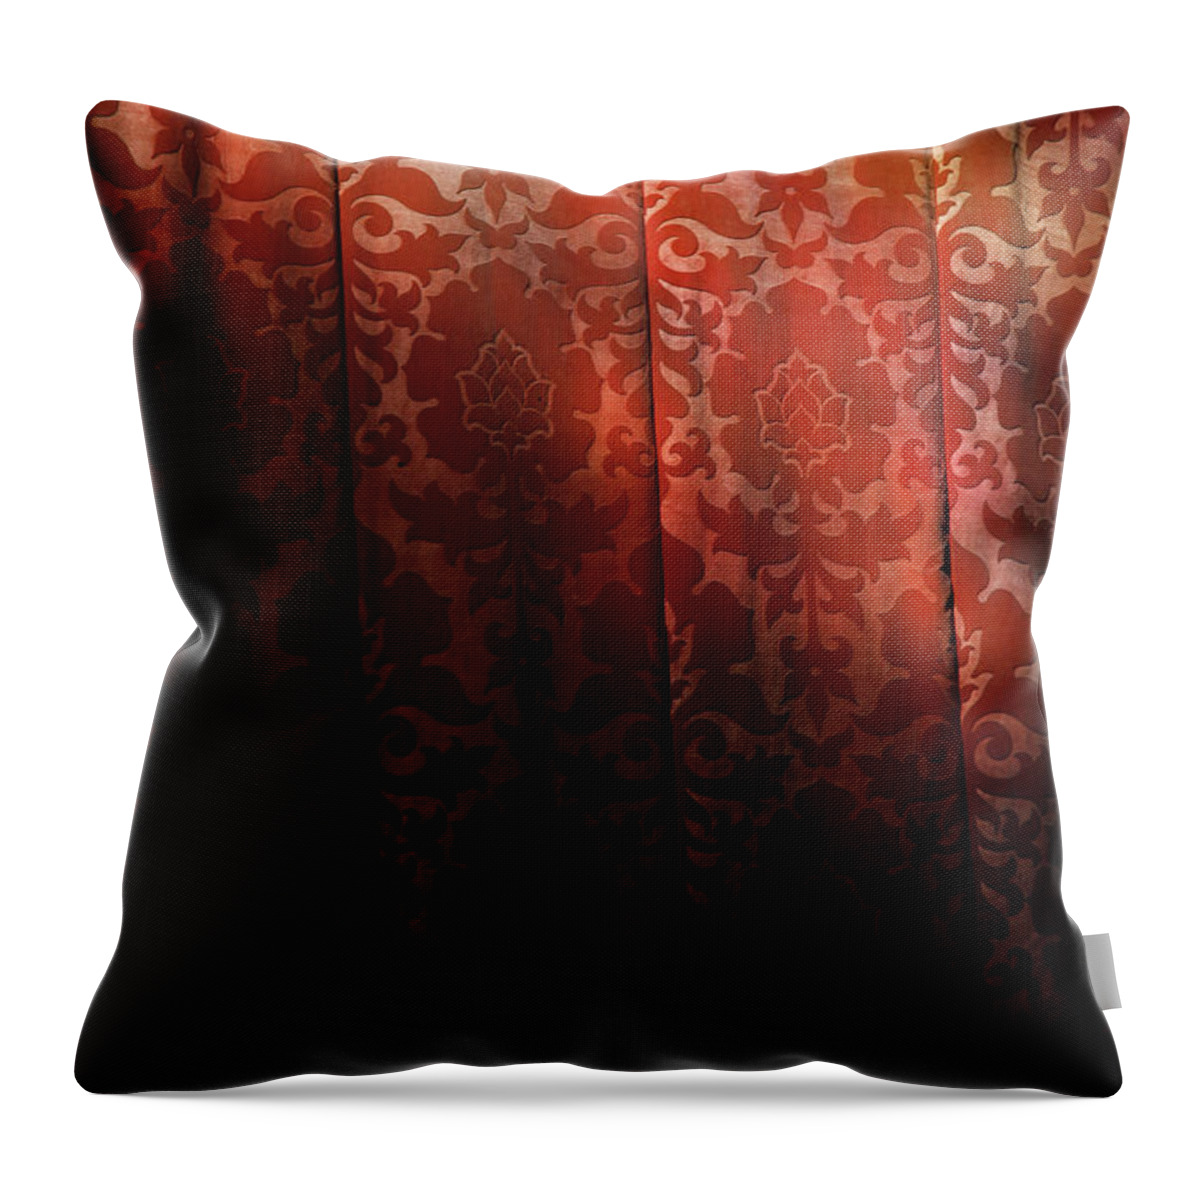 England Throw Pillow featuring the photograph Uk, England, Oxford, Light On Red Fabric by Westend61